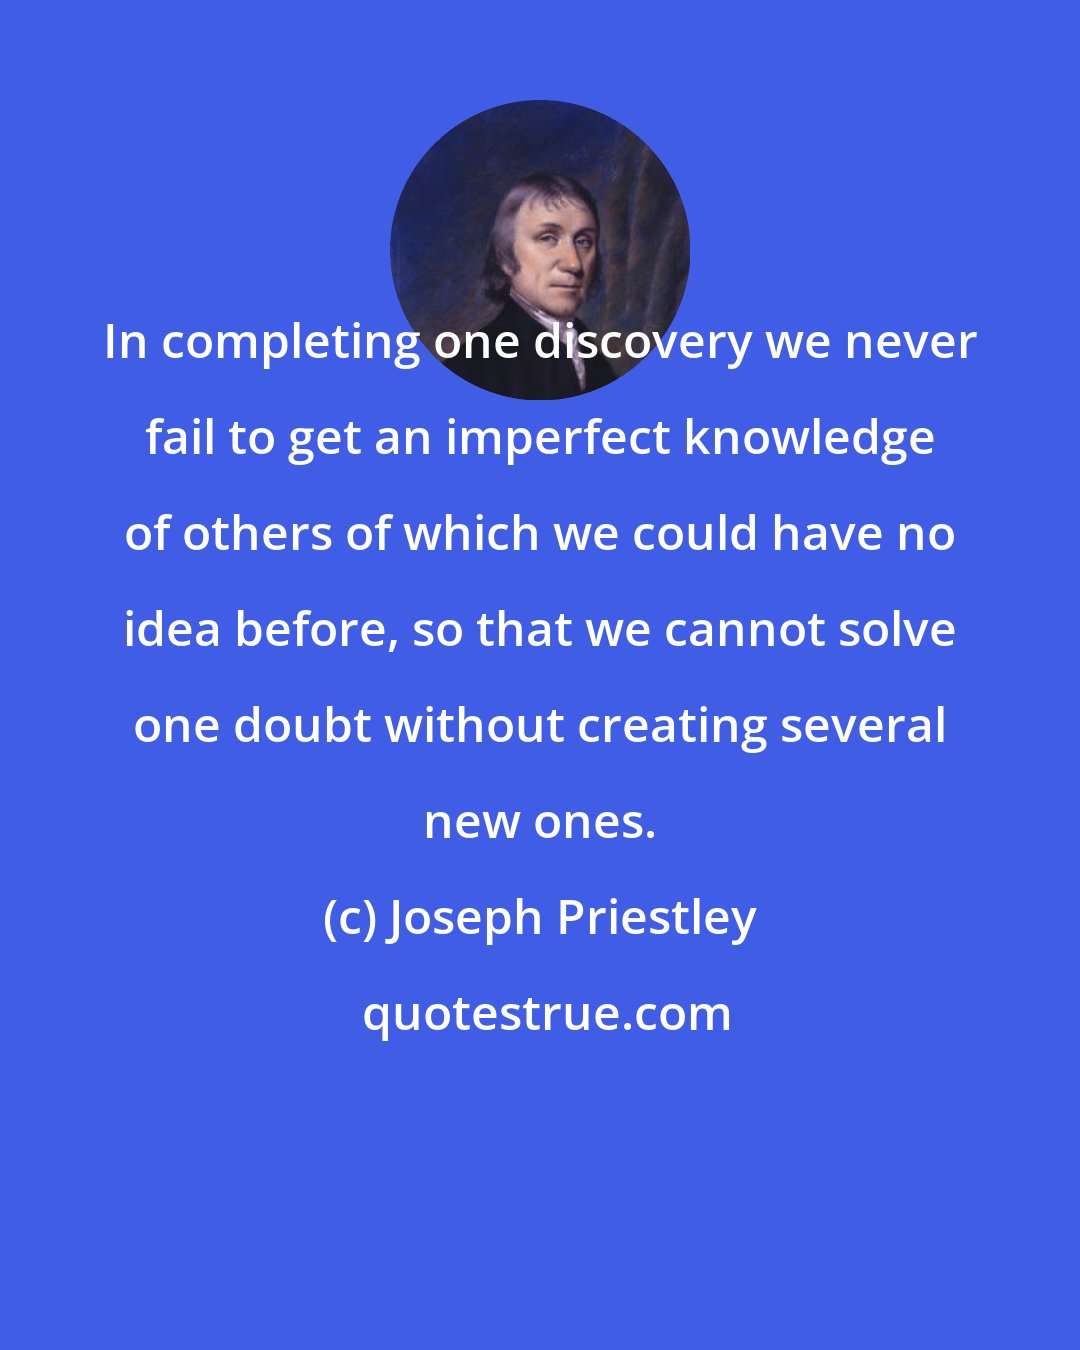 Joseph Priestley: In completing one discovery we never fail to get an imperfect knowledge of others of which we could have no idea before, so that we cannot solve one doubt without creating several new ones.